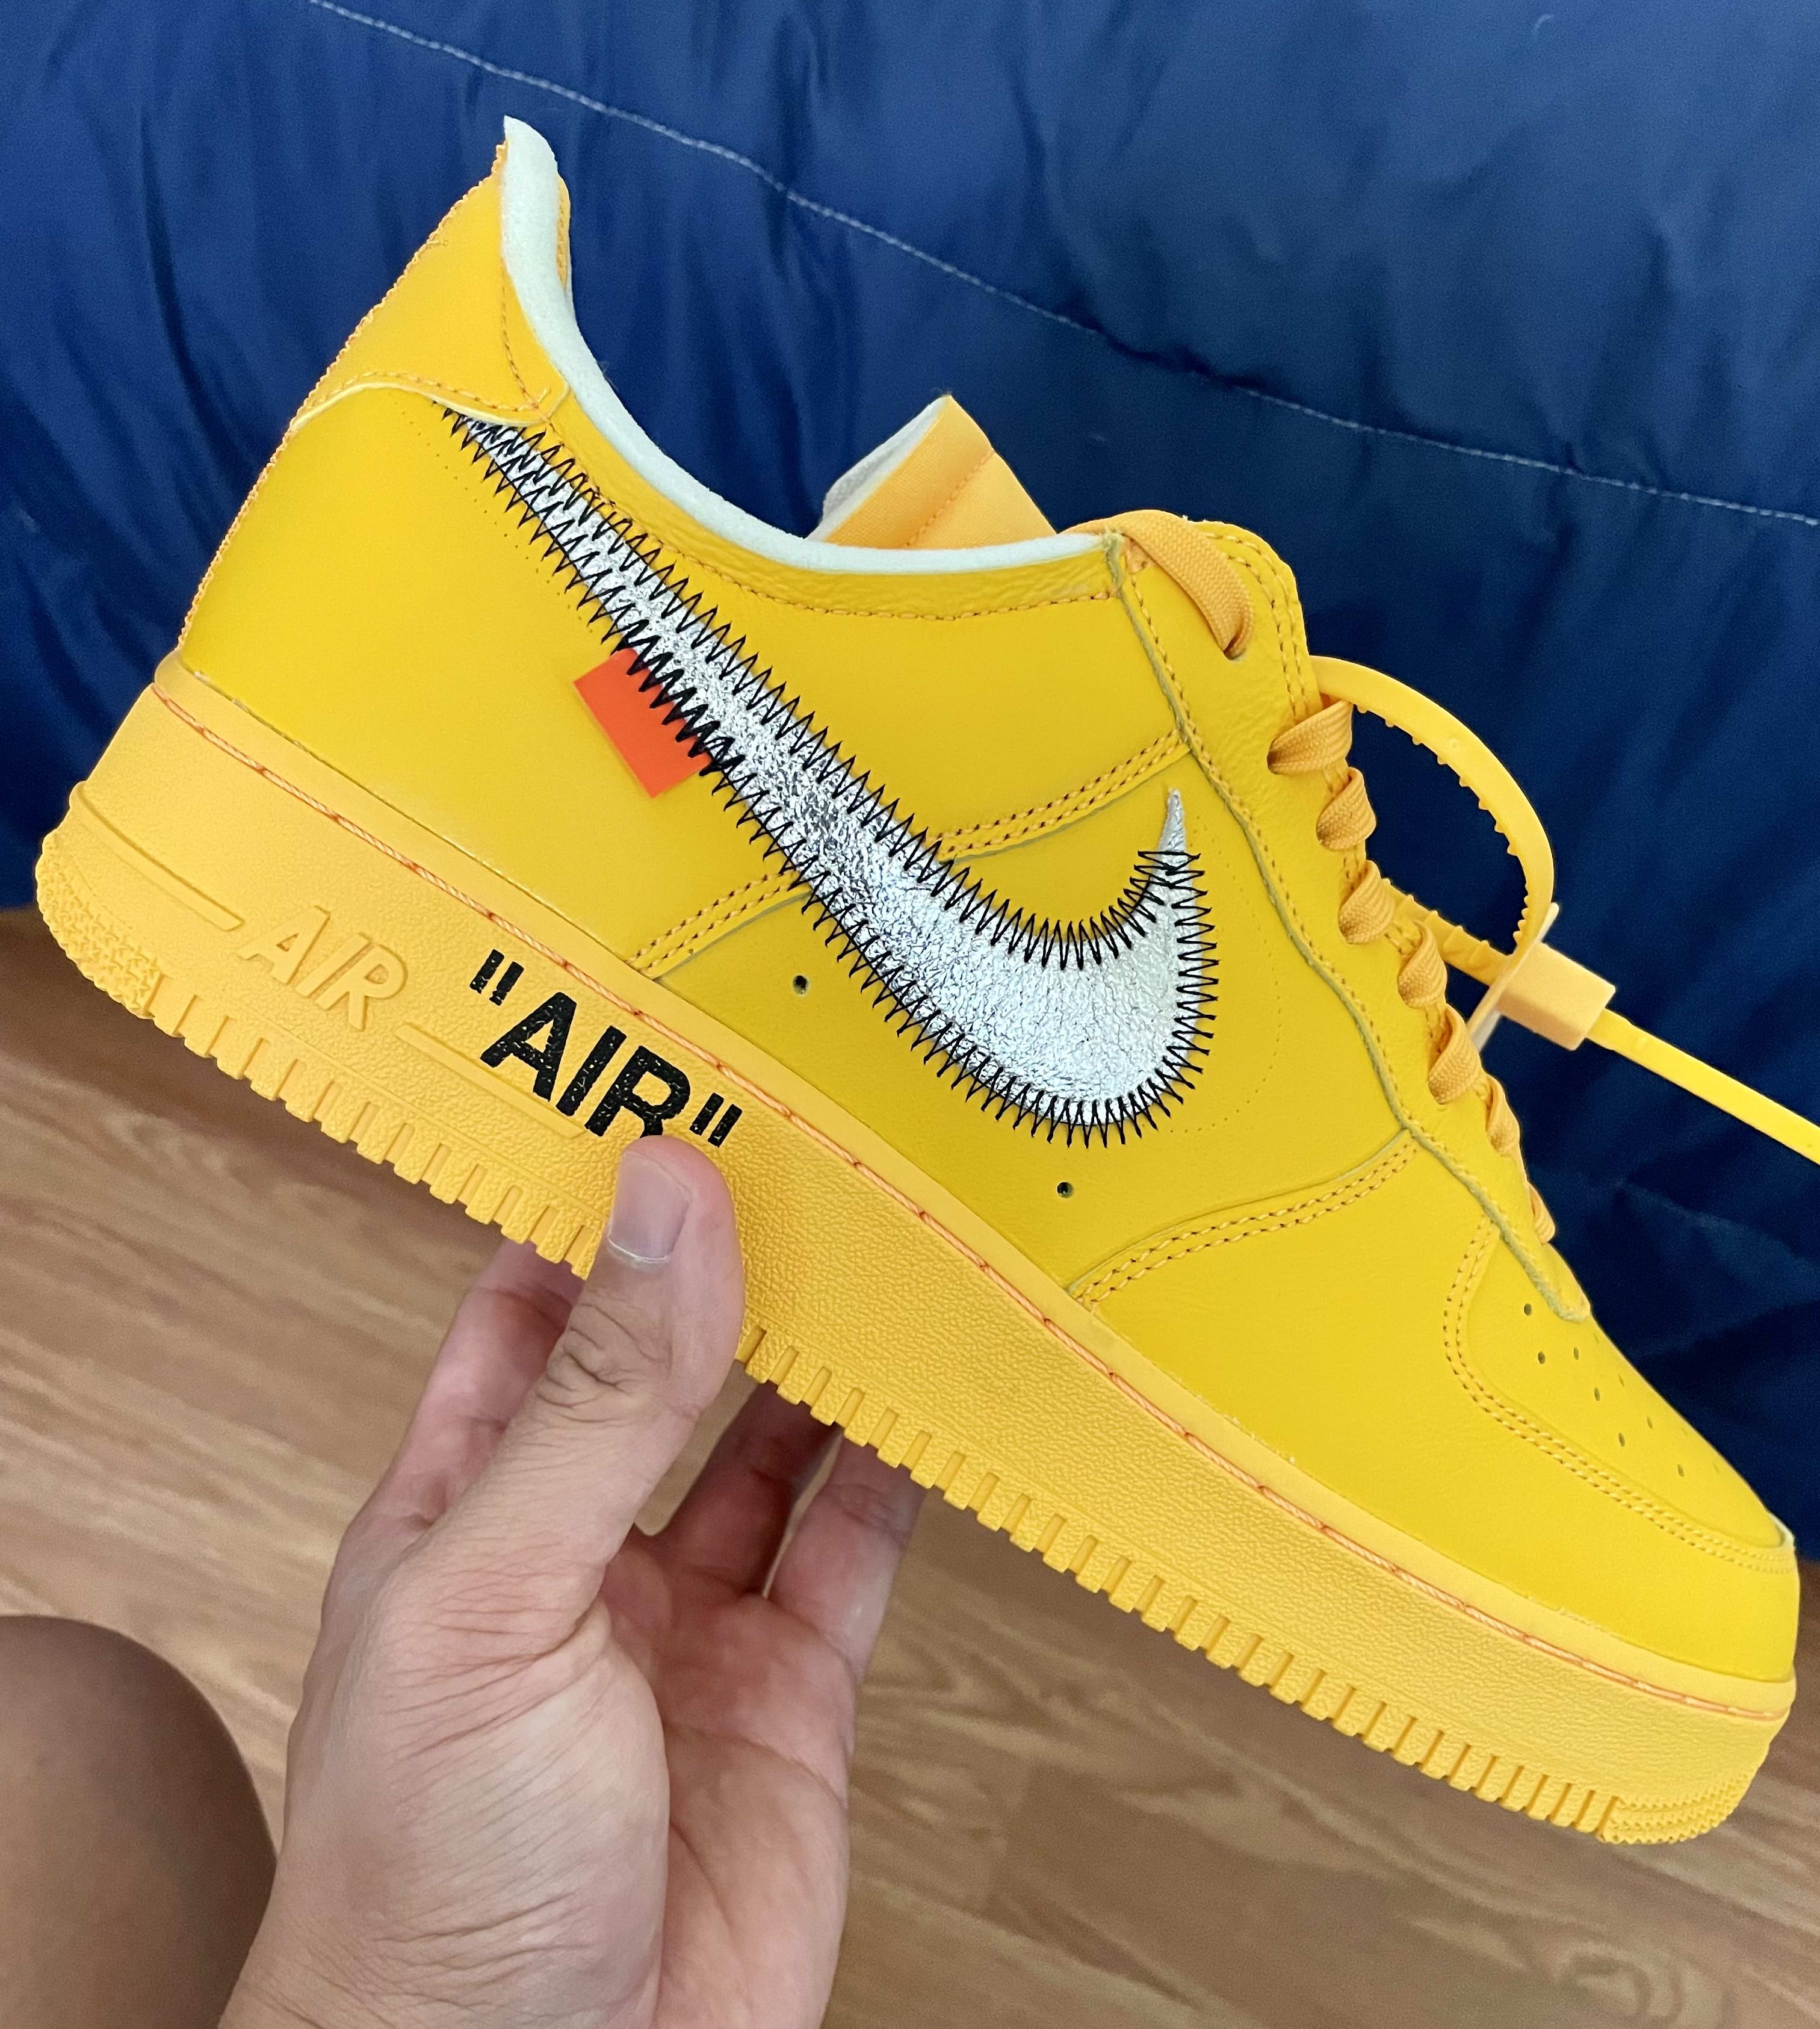 People Tricked Nike's SNKRS Stash to Get Air Force 1 | Complex